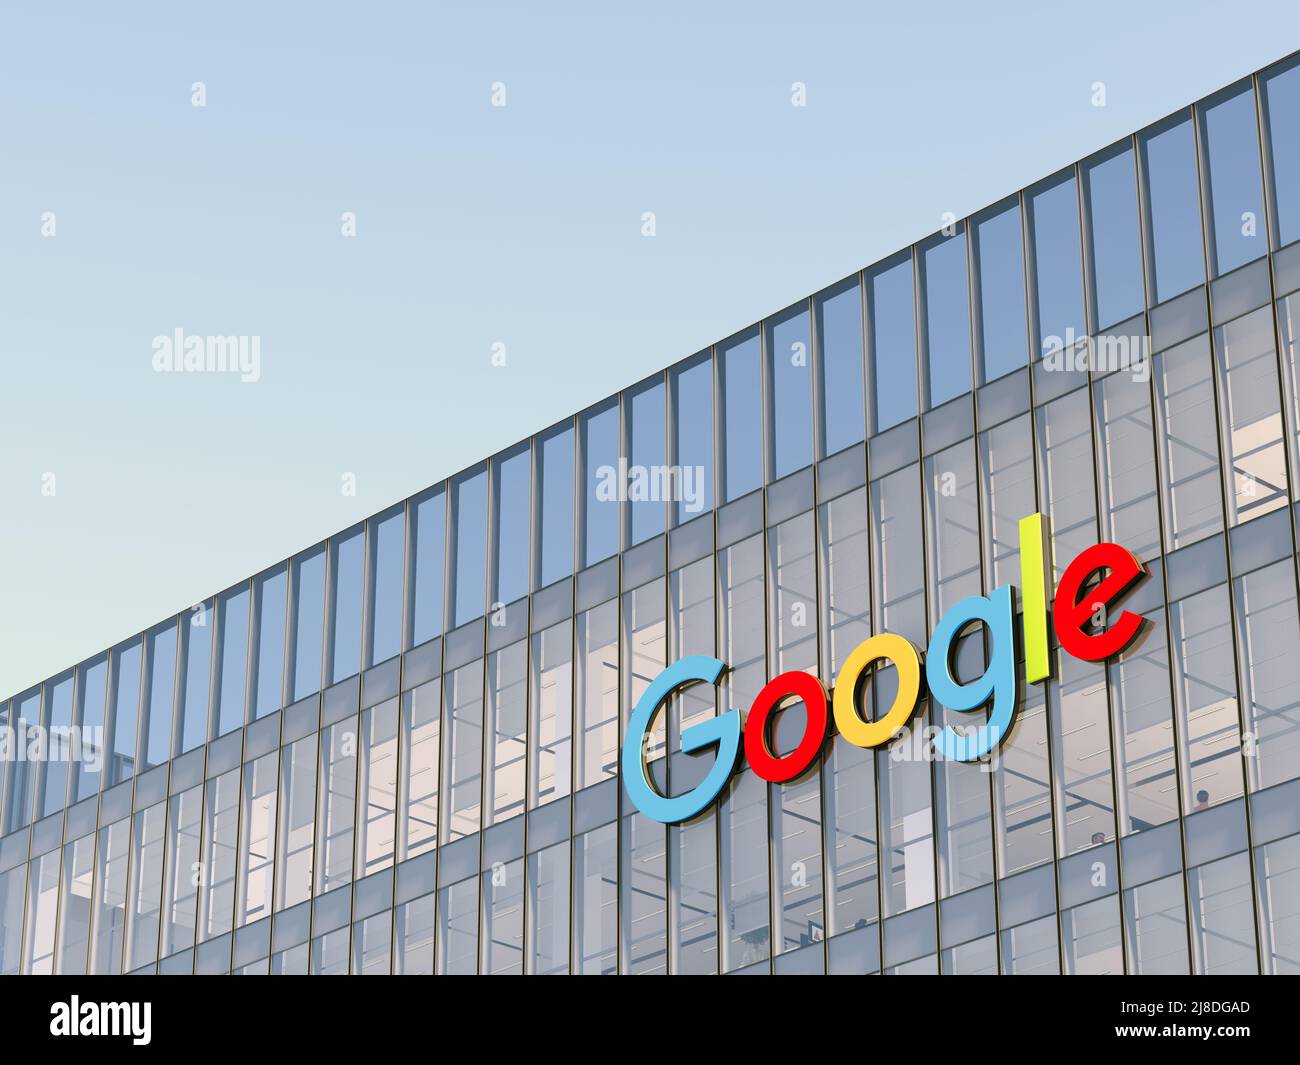 Mountain View, CA, USA. May 2, 2022. Editorial Use Only, 3D CGI. Google Signage Logo on Top of Glass Building. Workplace of Technology Company Office Stock Photo